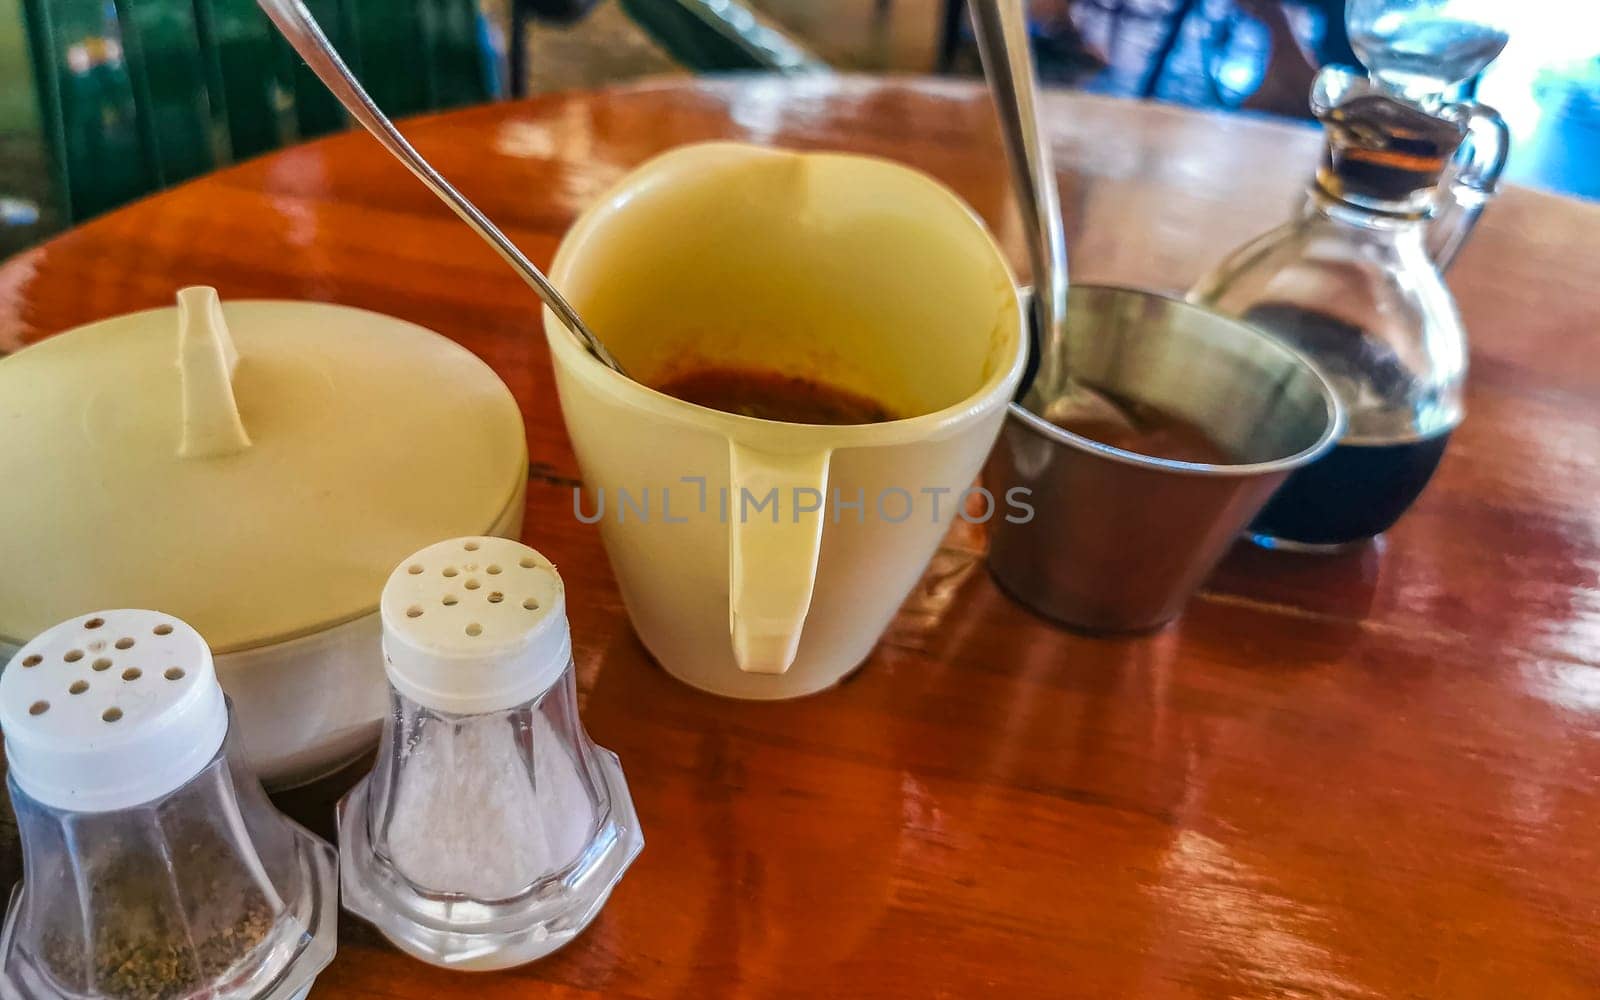 Sugar salt and pepper shaker and different sauces in restaurant in Zicatela Puerto Escondido Oaxaca Mexico.